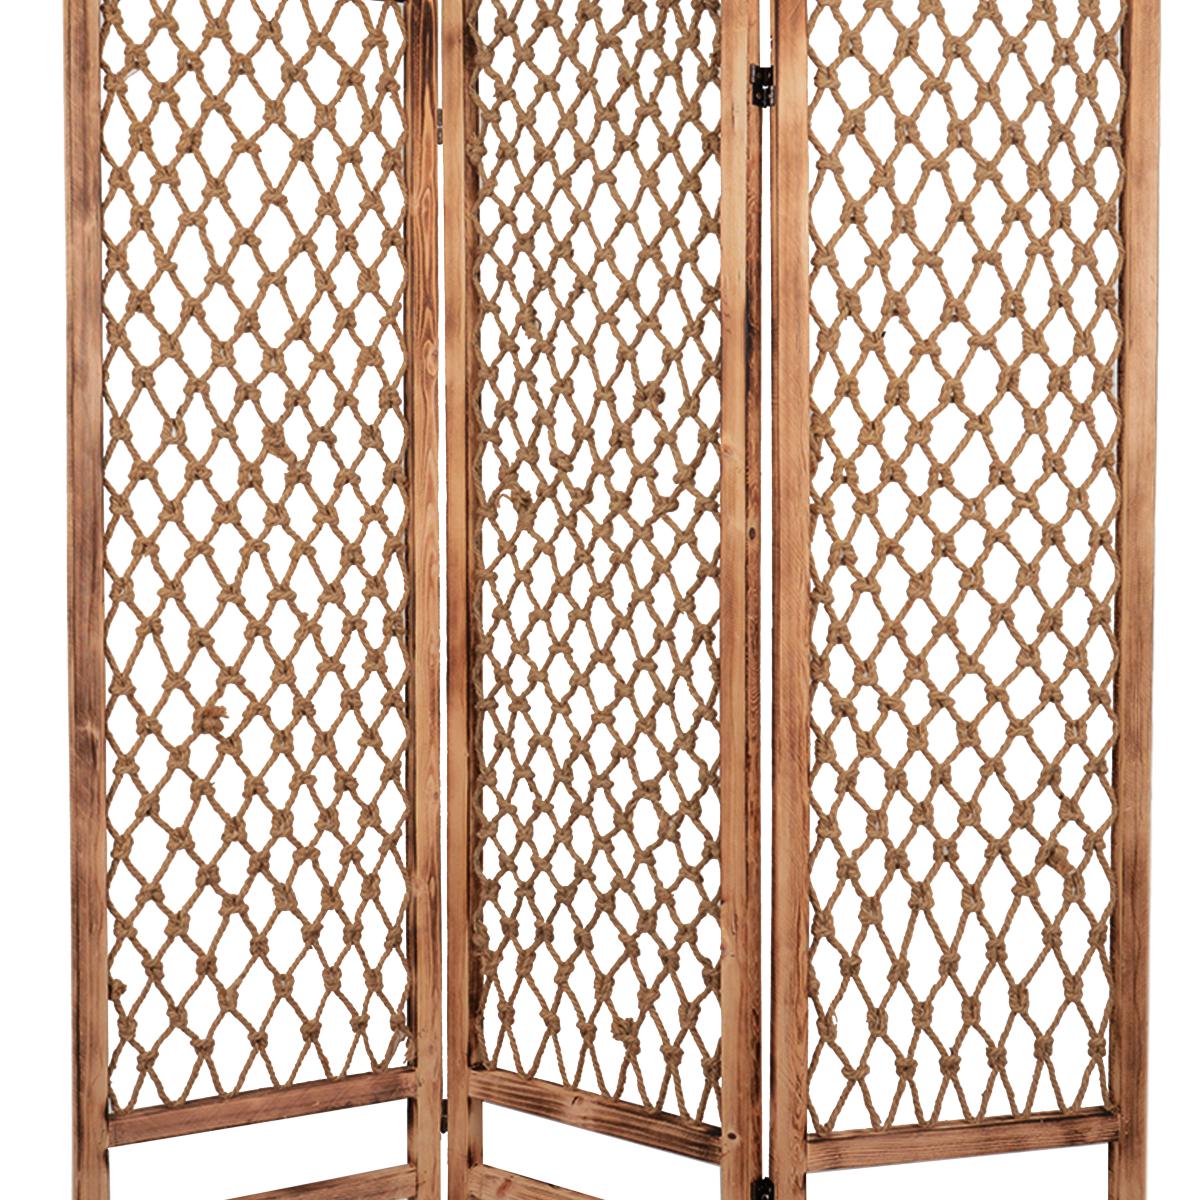 3 Panel Traditional Foldable Screen with Rope Knot Design, Brown - BM205389